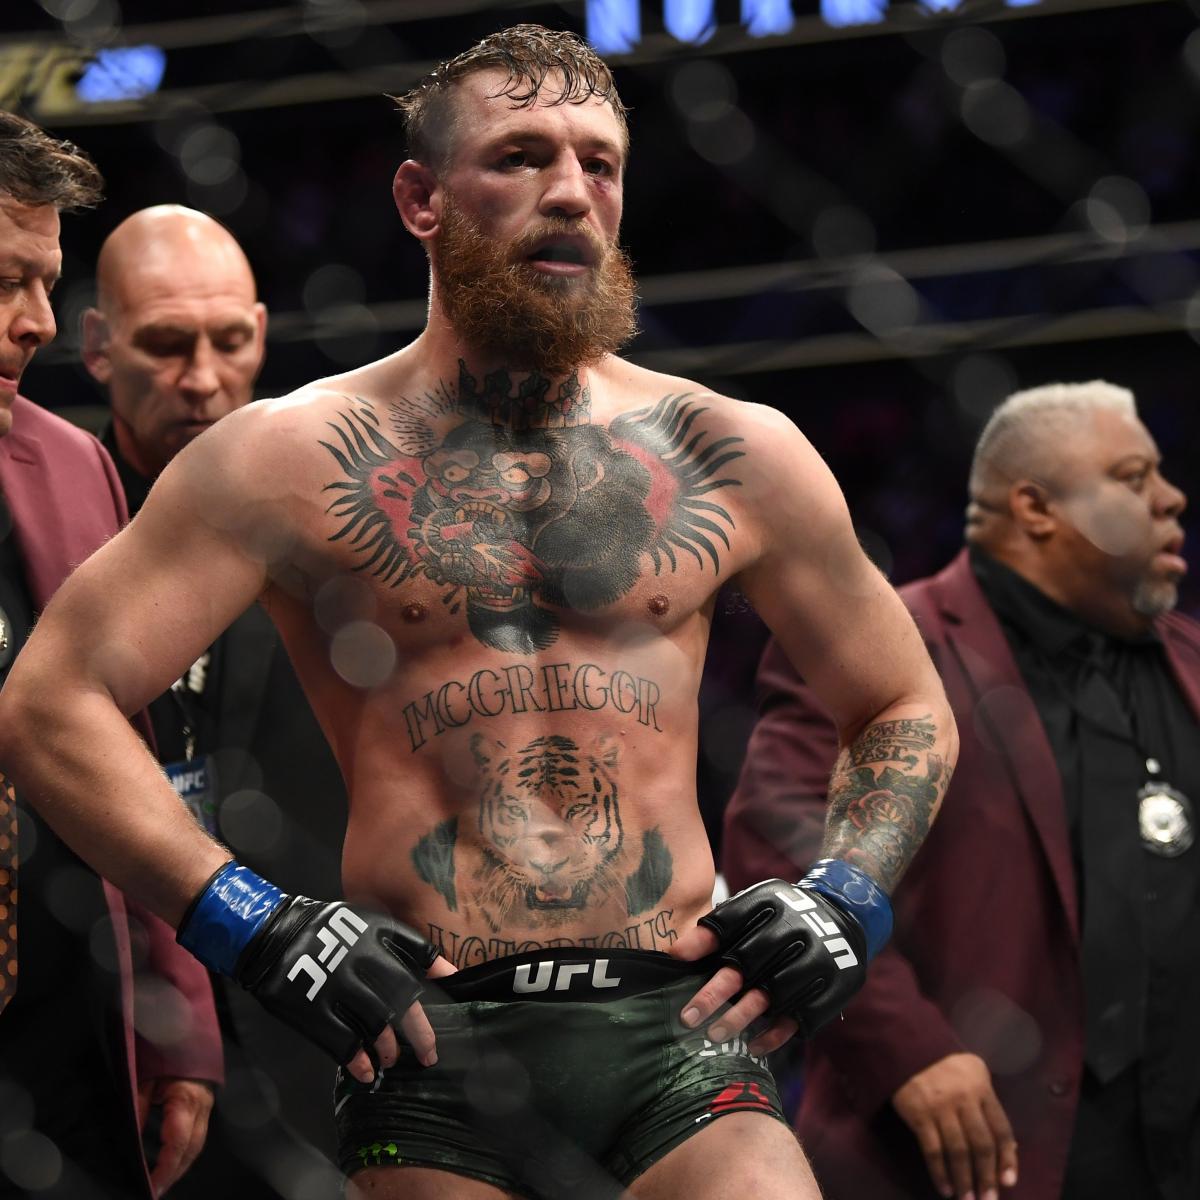 Report: Newly Retired Conor McGregor Under Investigation for Sexual